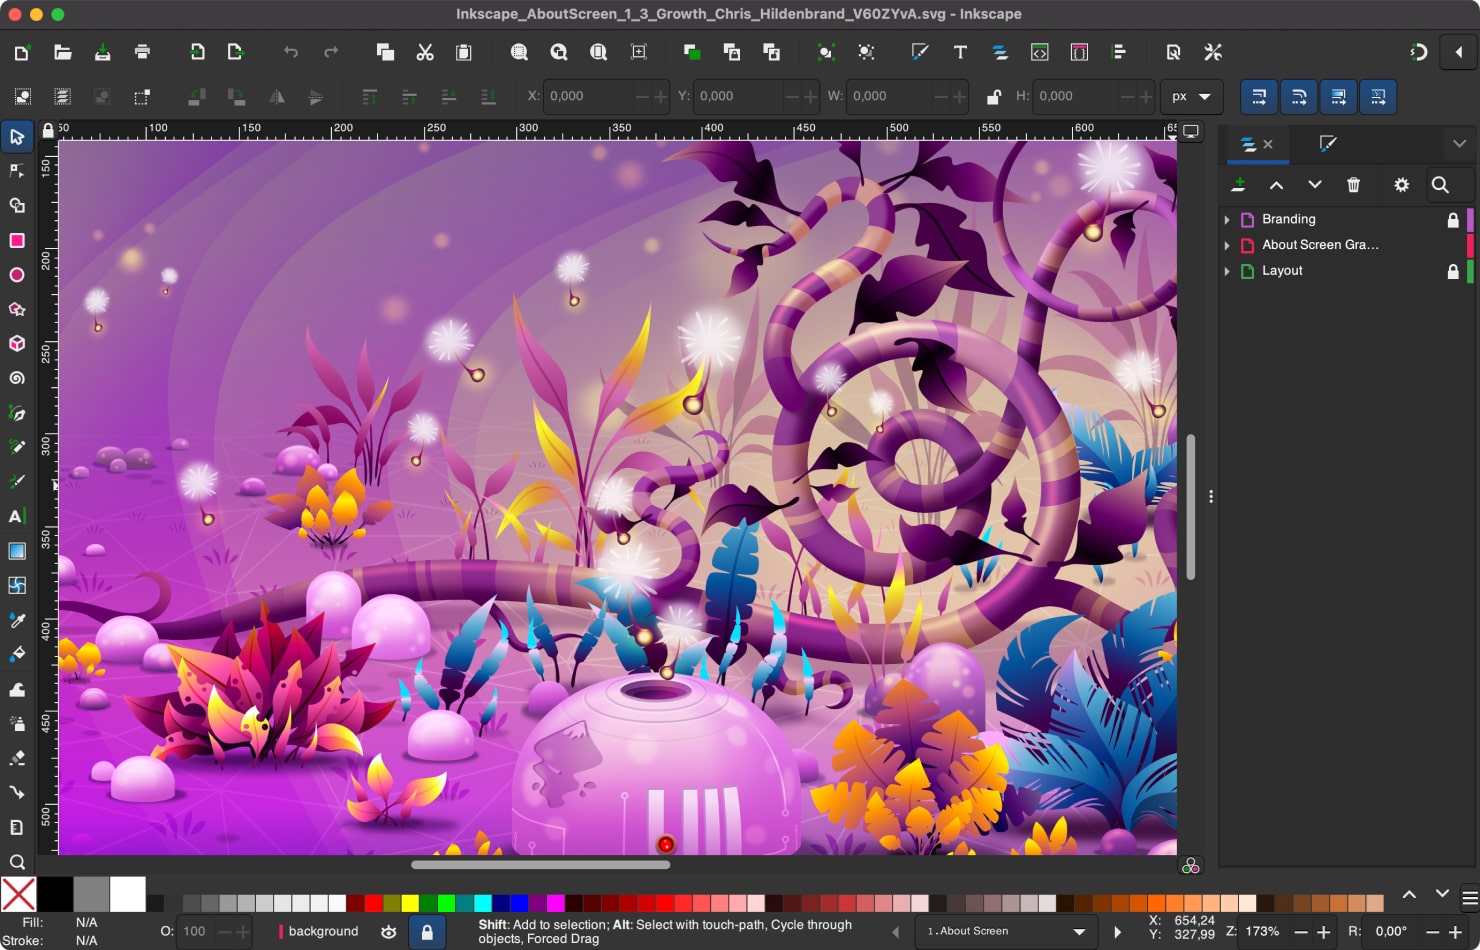 Inkscape interface with the illustration.